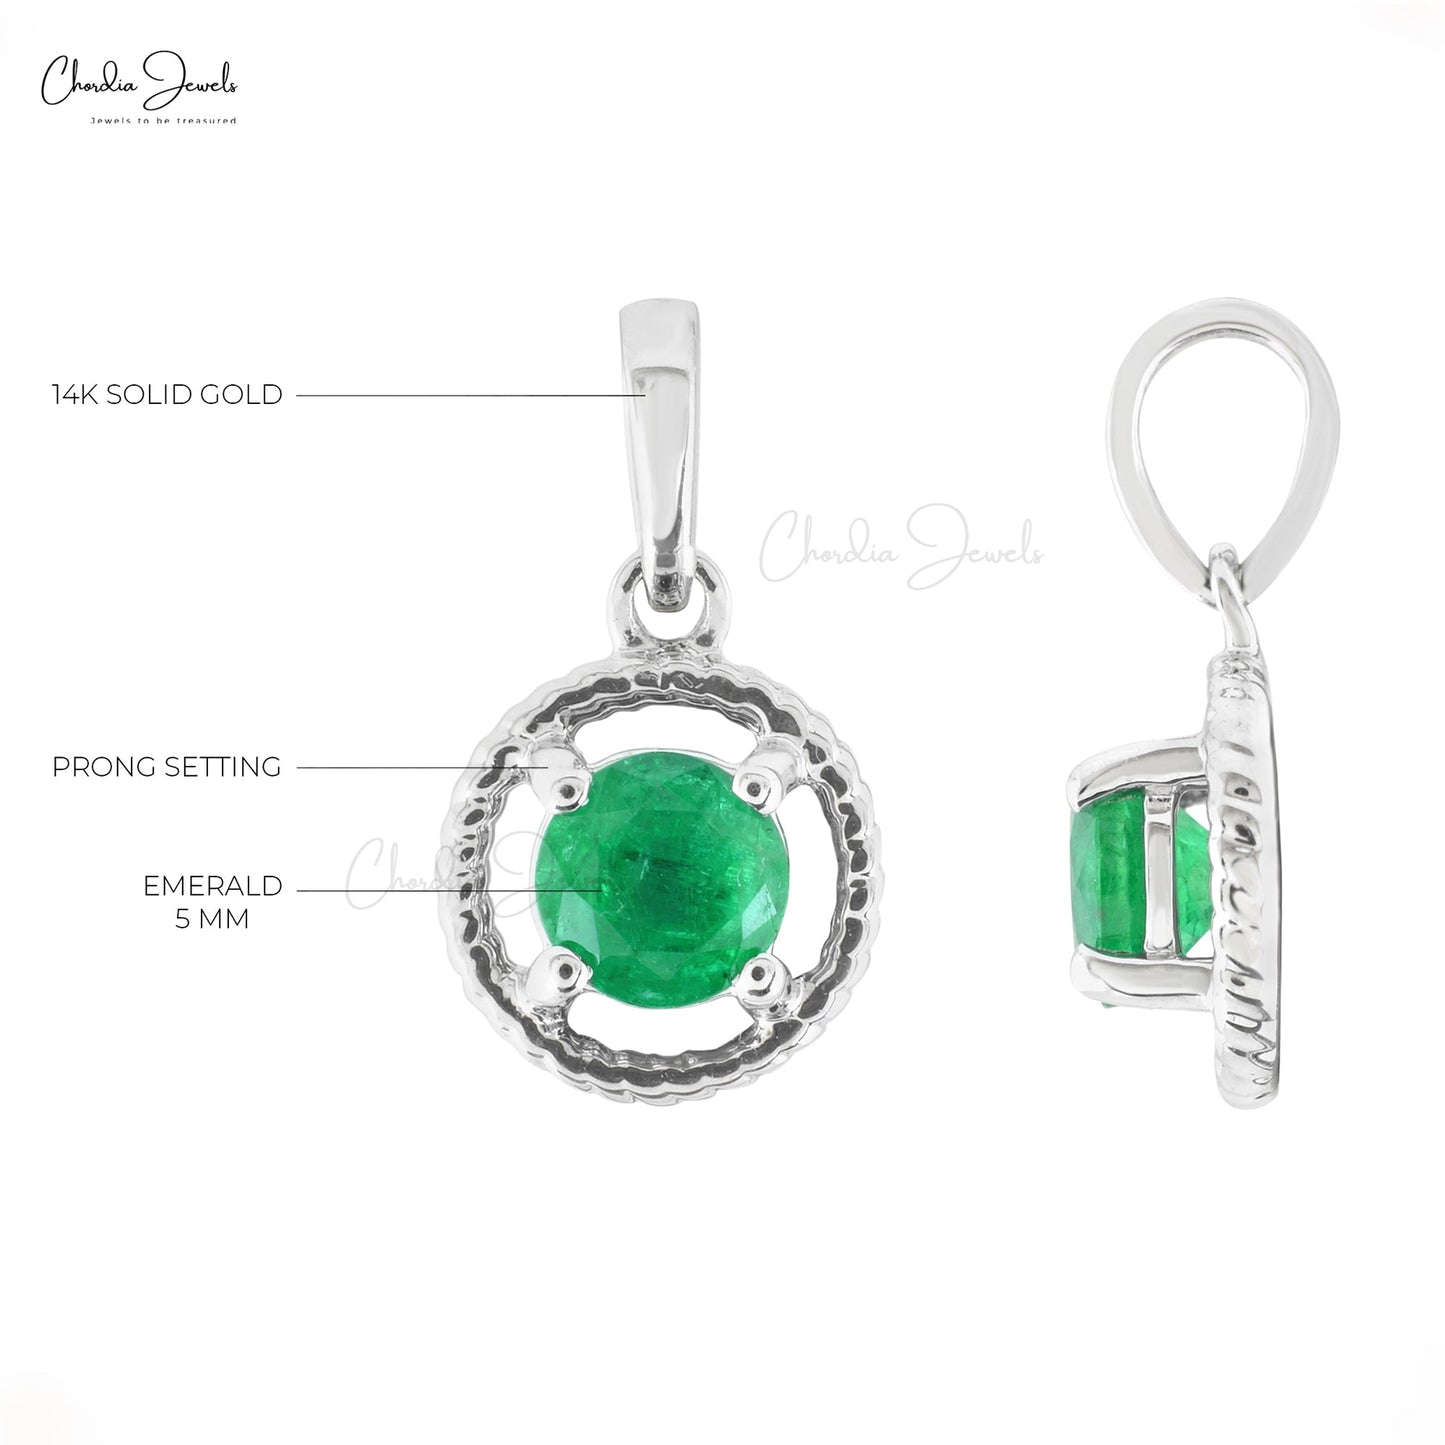 Natural 0.47ct Emerald Gemstone Spiral Pendant 14k Real White Gold Dainty Pendant For Gift